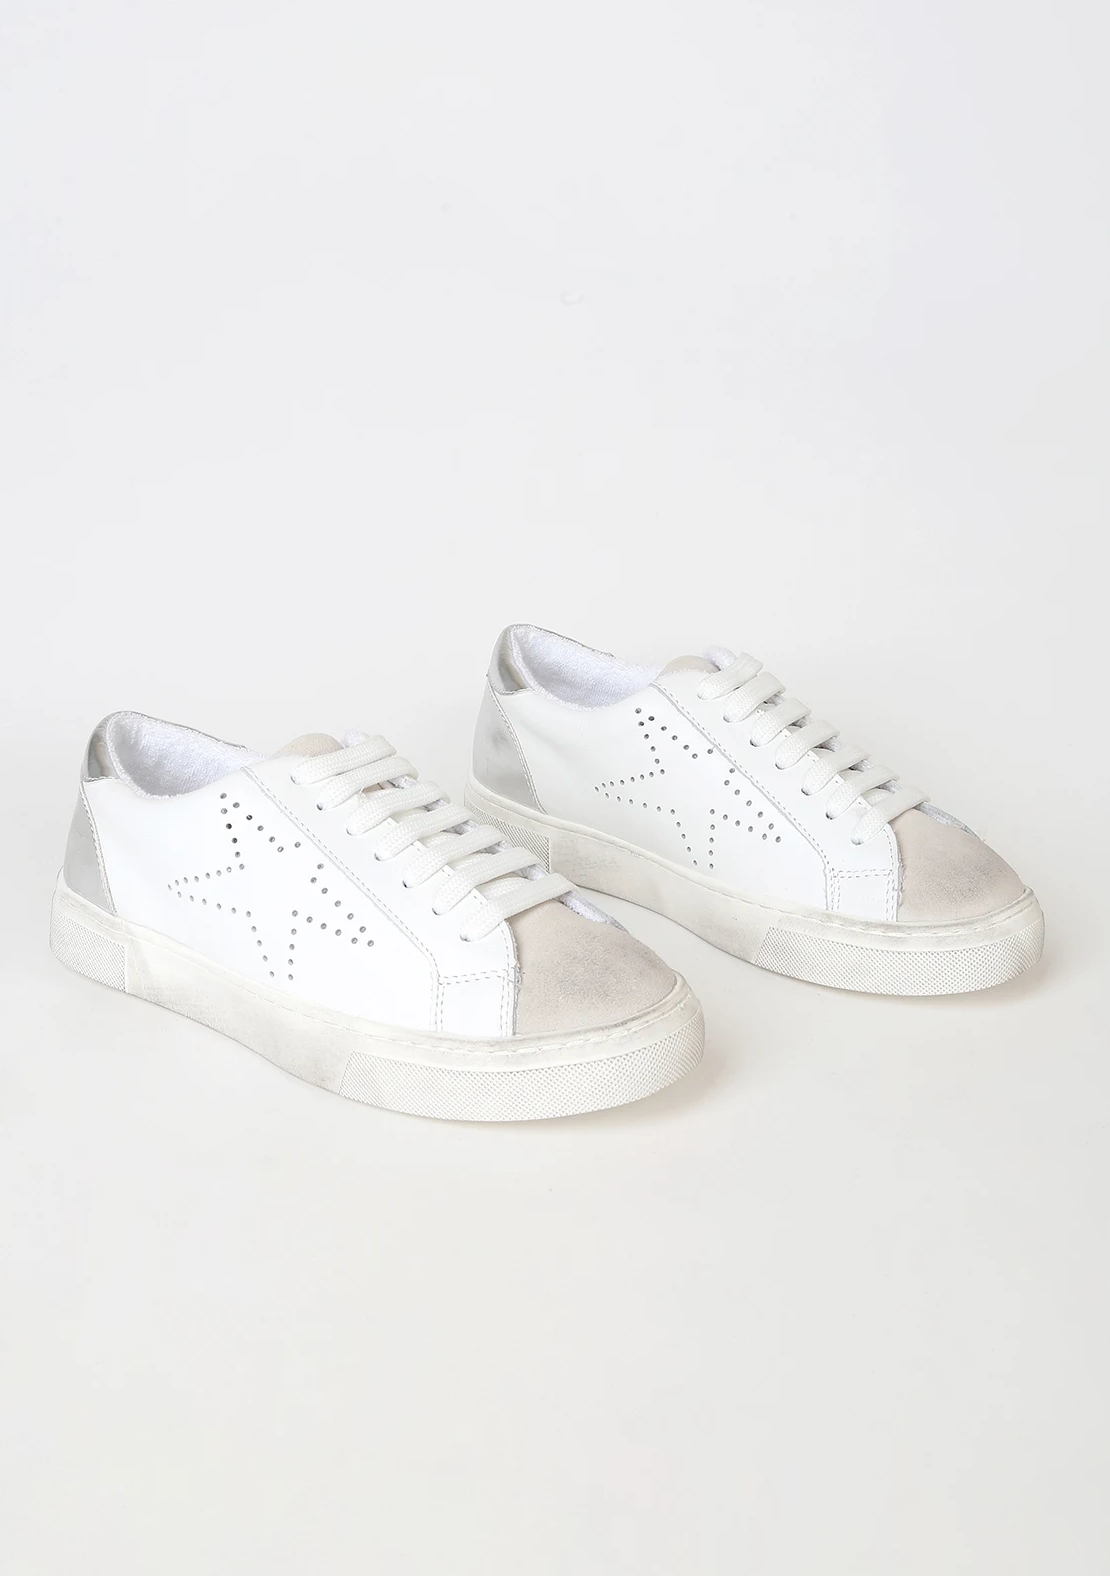 Steve Madden Rezume White Leather Distressed Sneakers